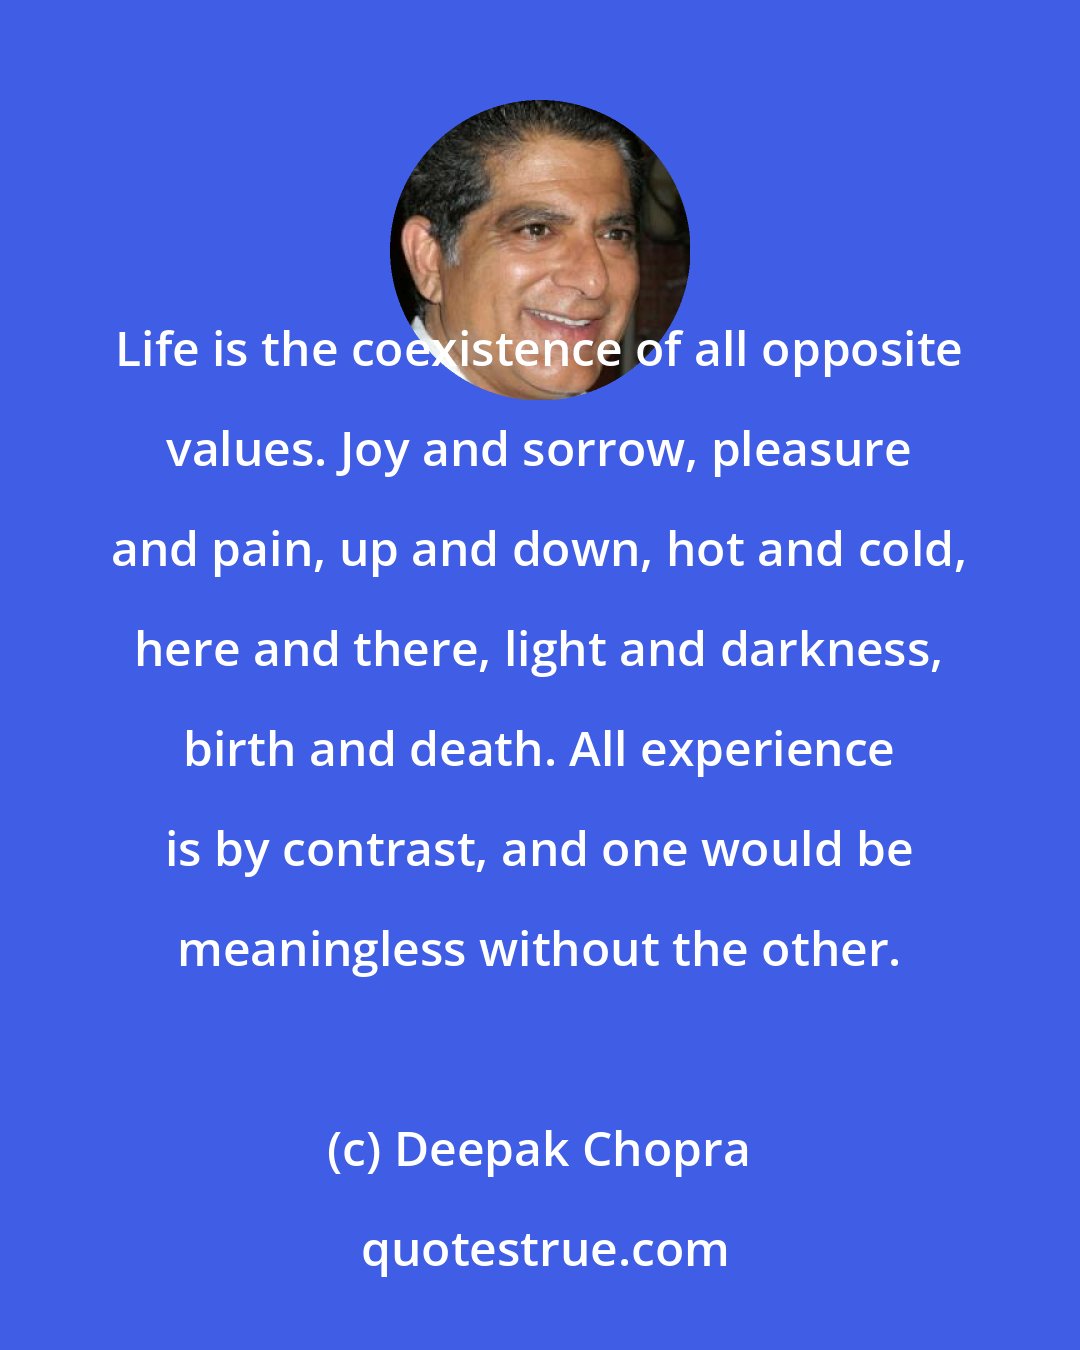 Deepak Chopra: Life is the coexistence of all opposite values. Joy and sorrow, pleasure and pain, up and down, hot and cold, here and there, light and darkness, birth and death. All experience is by contrast, and one would be meaningless without the other.